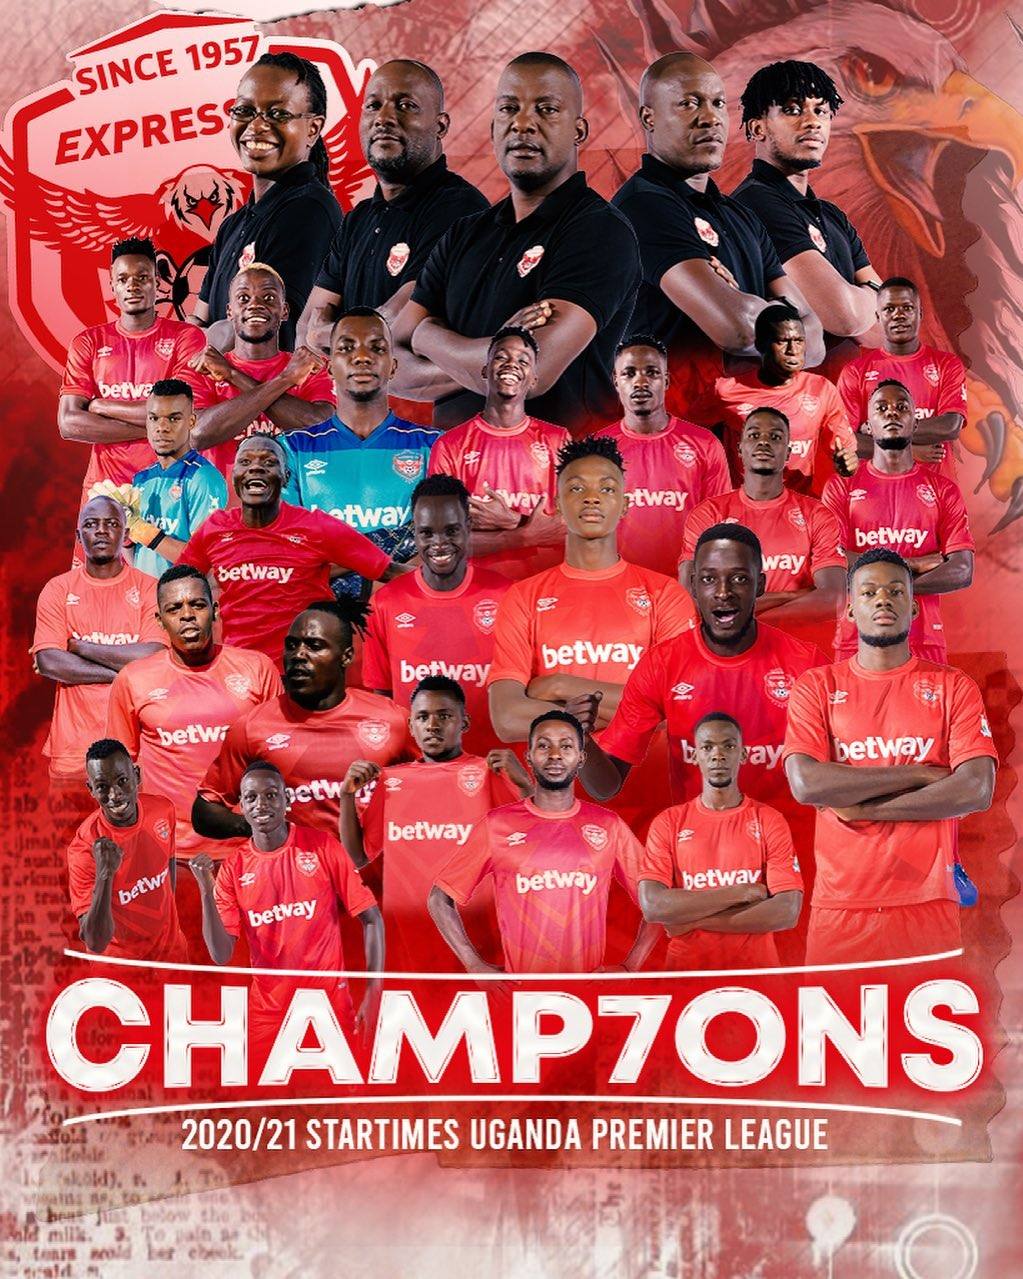 Express FC Just Like Vipers, Snatch the Uganda Premier League